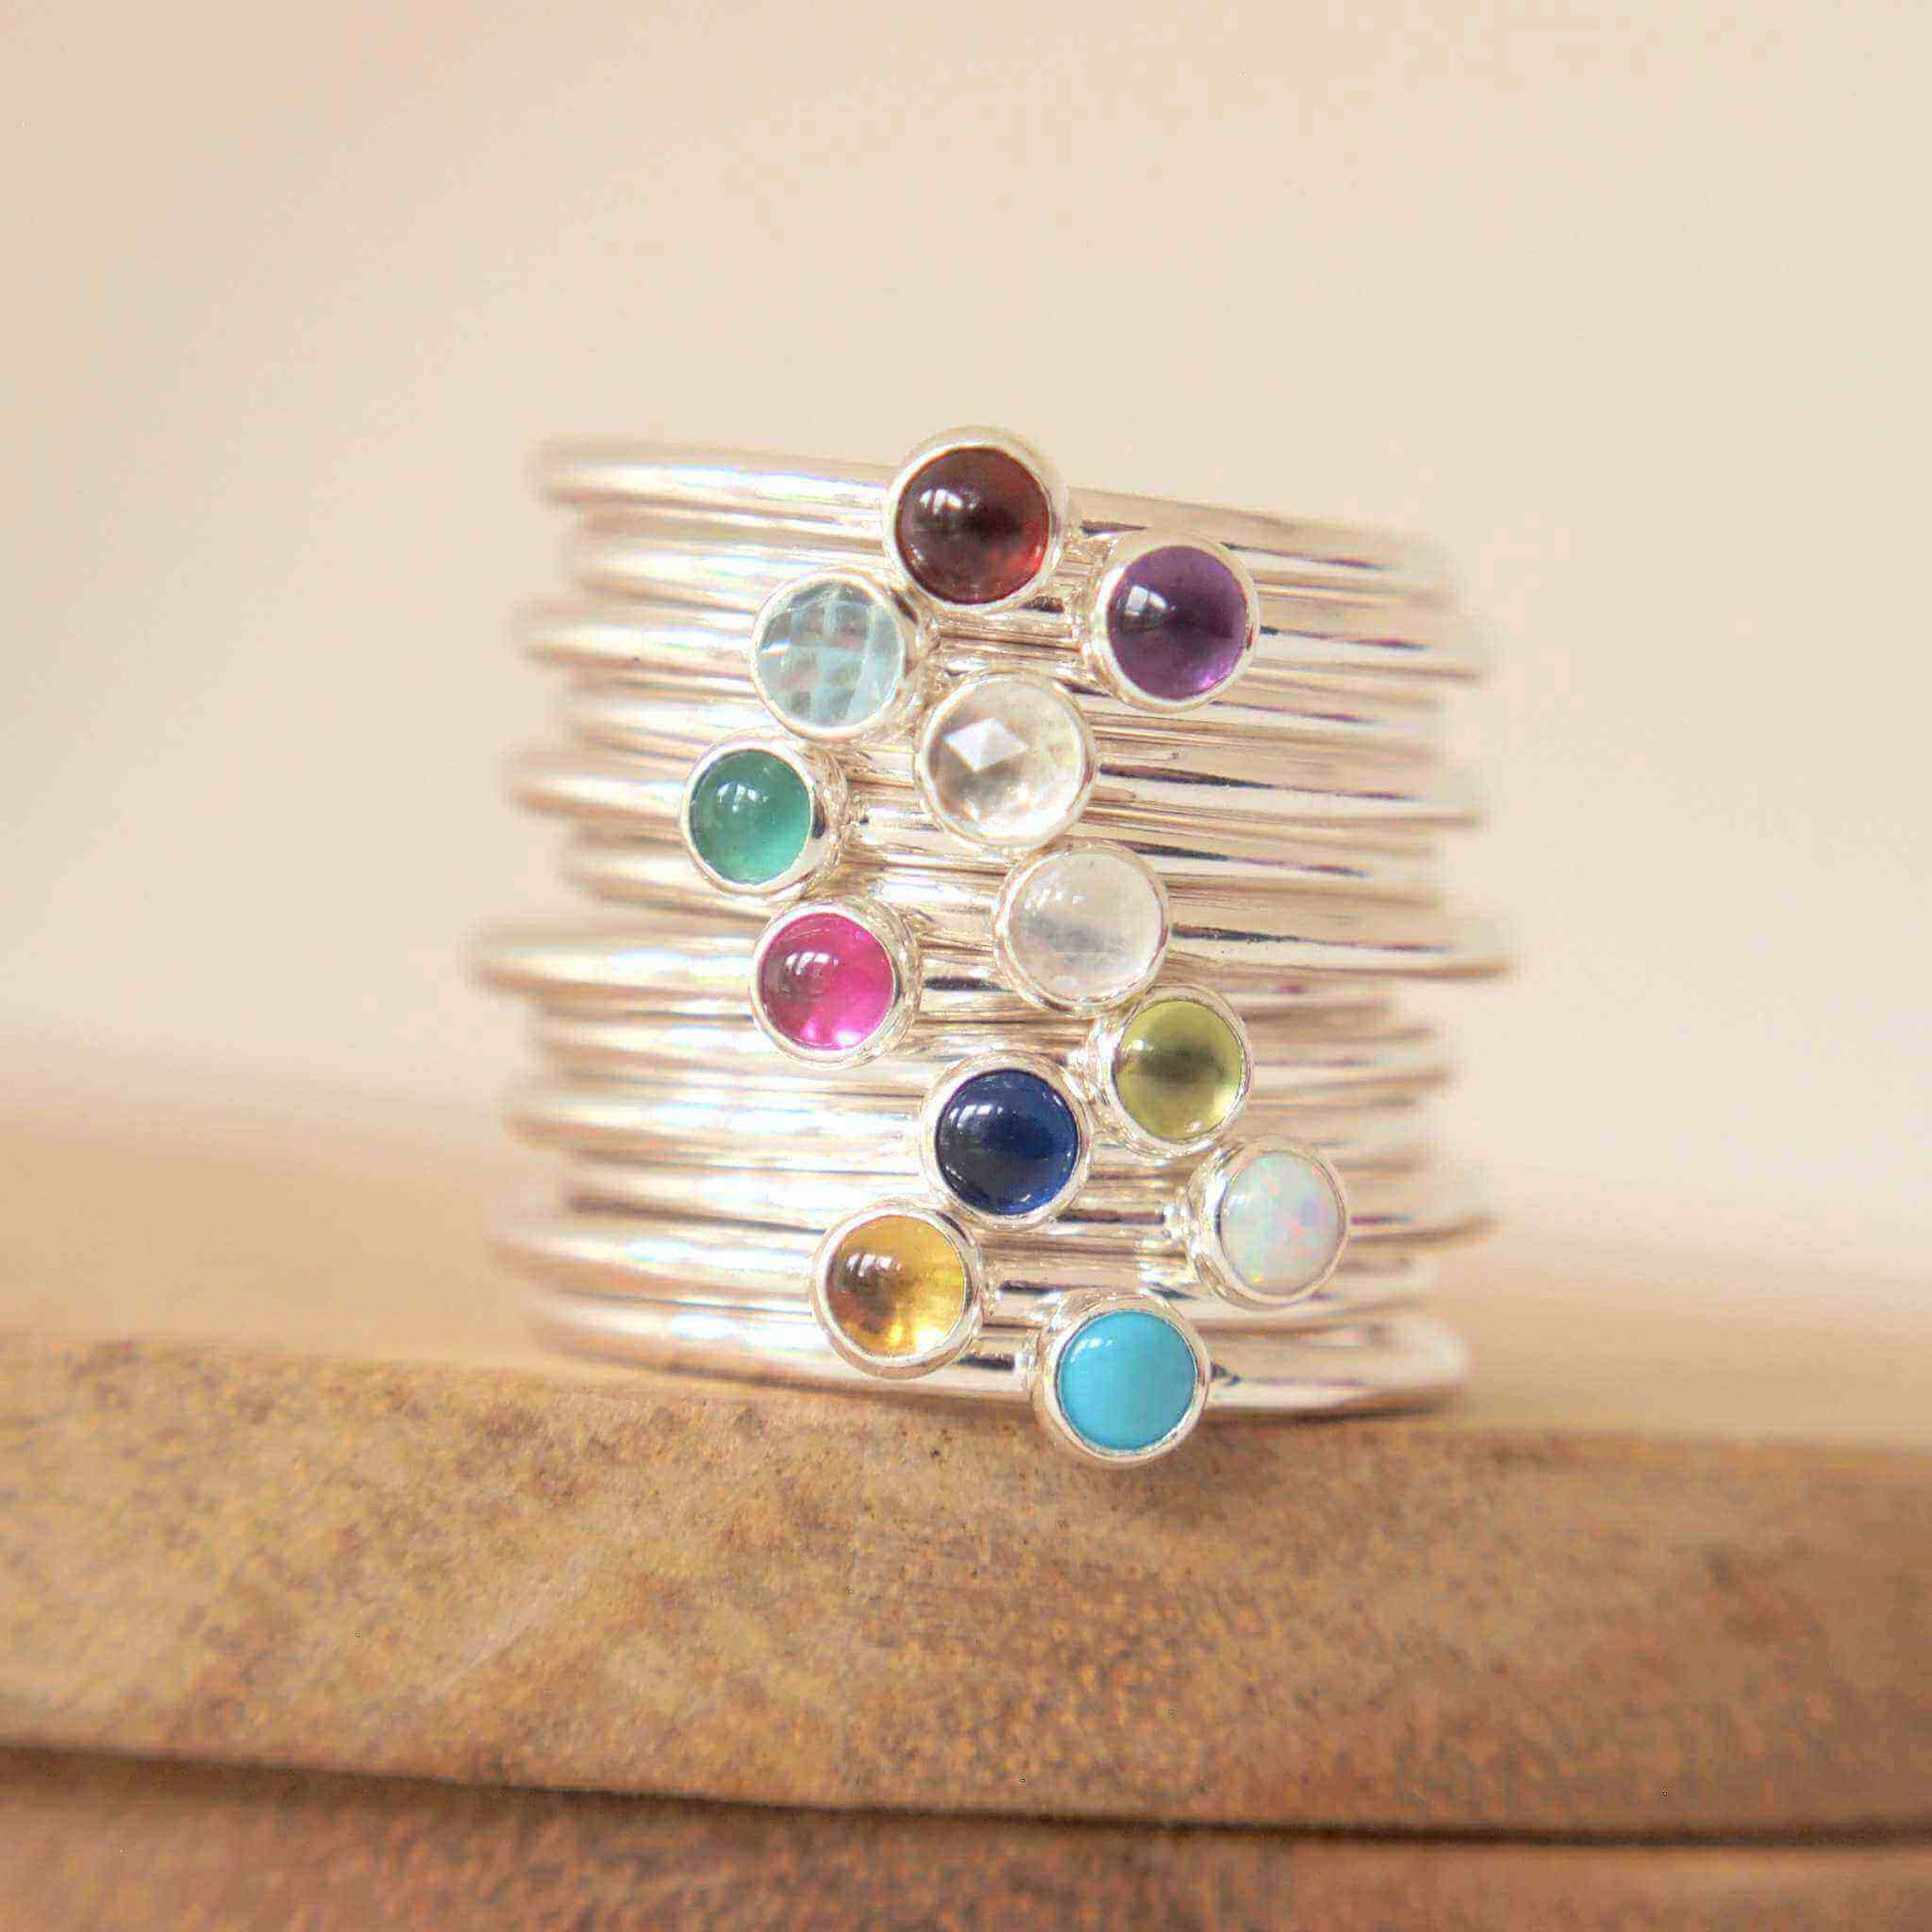 Set of twelve sterling silver gemstones rings each with a small 3mm round cabochon. Each ring has a birthstone from January to December . Handmade by Maram Jewellery in Edinburgh